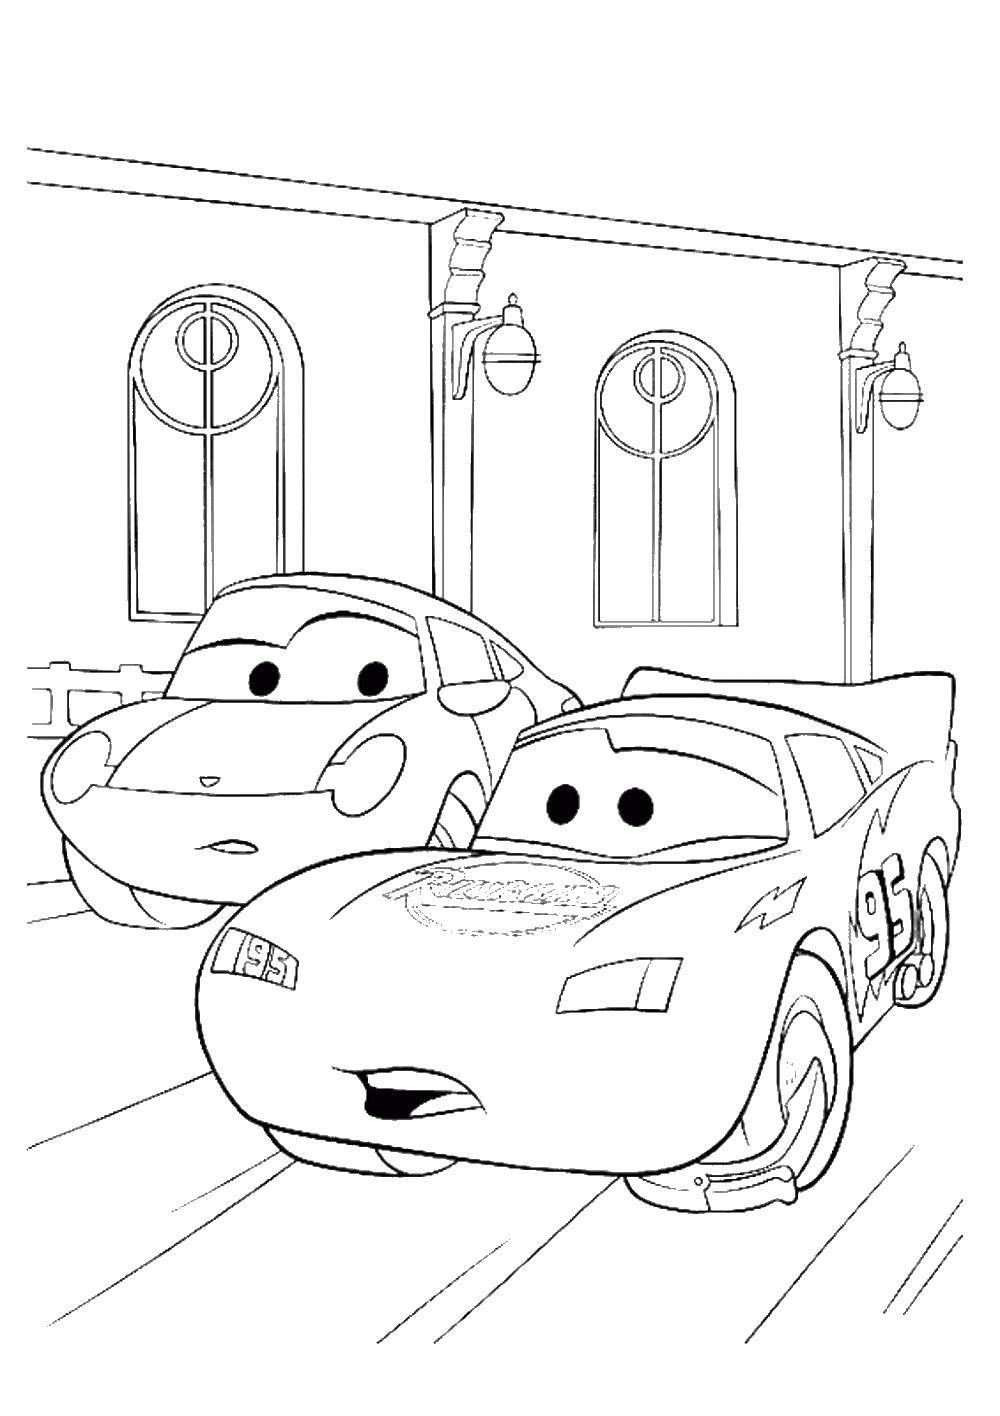 Coloring Lightning McQueen and Sally. Category Wheelbarrows. Tags:  McQueen, Sally, cars.